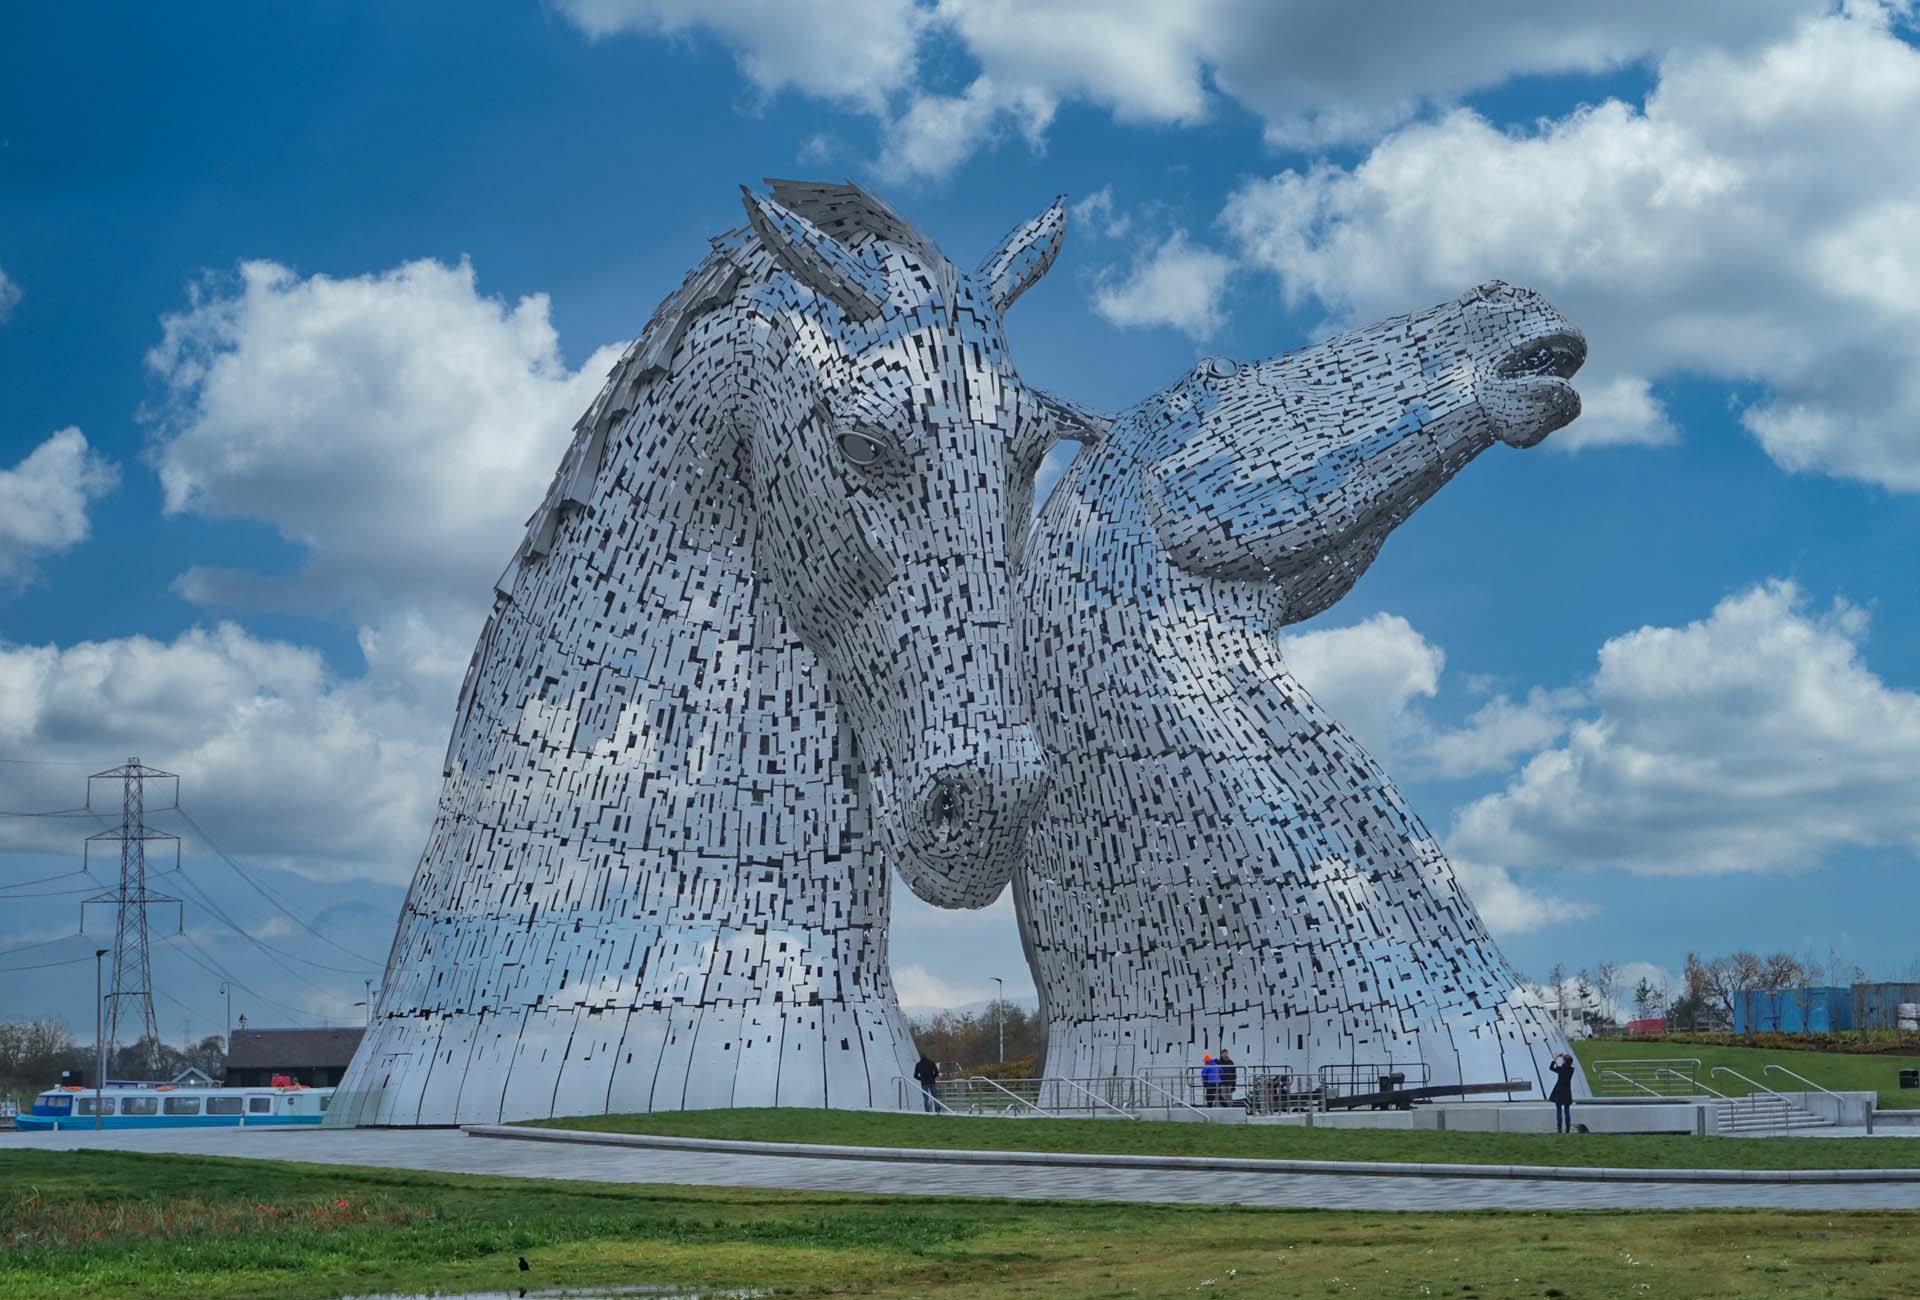 kelpies prints 877, buy your Kelpies prints online at Photogold, canvas and photographic prints of the Kelpies